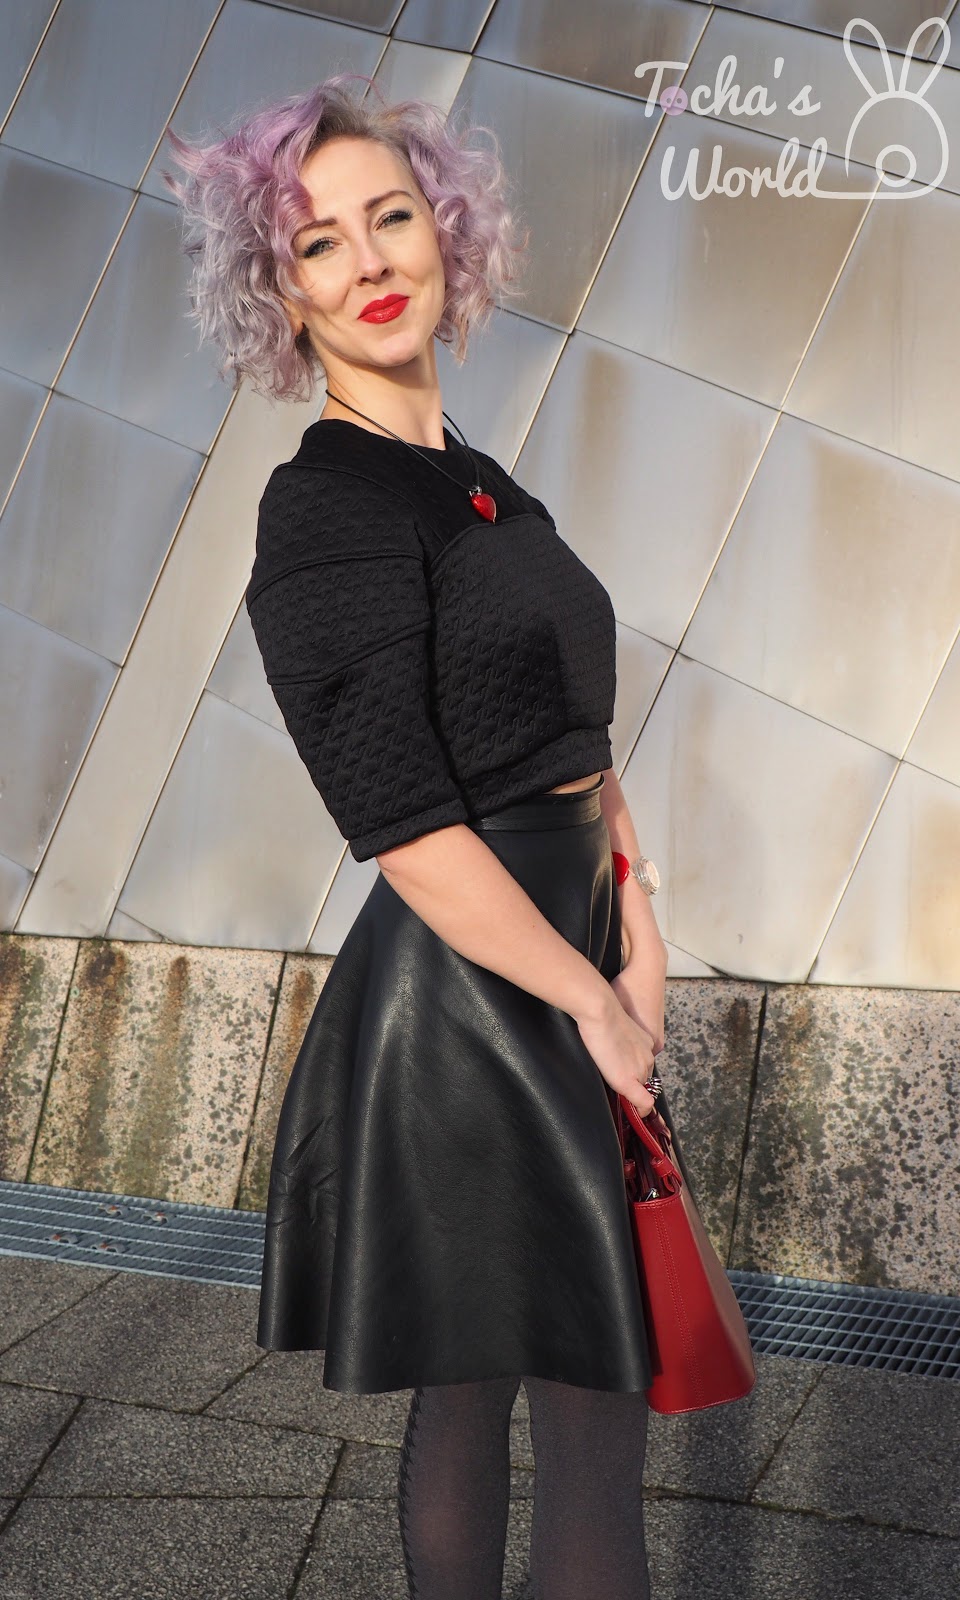 Armadillo, Black Milk bummers, Calzedonia, Clyde Auditorium, crop top, Descience, Glasgow Clyde College, Glasgow Science Centre, hot pants, houndstooth, Raglan sleeve, Remnant Kings, scuba, semi-circle skirt, yoke, 